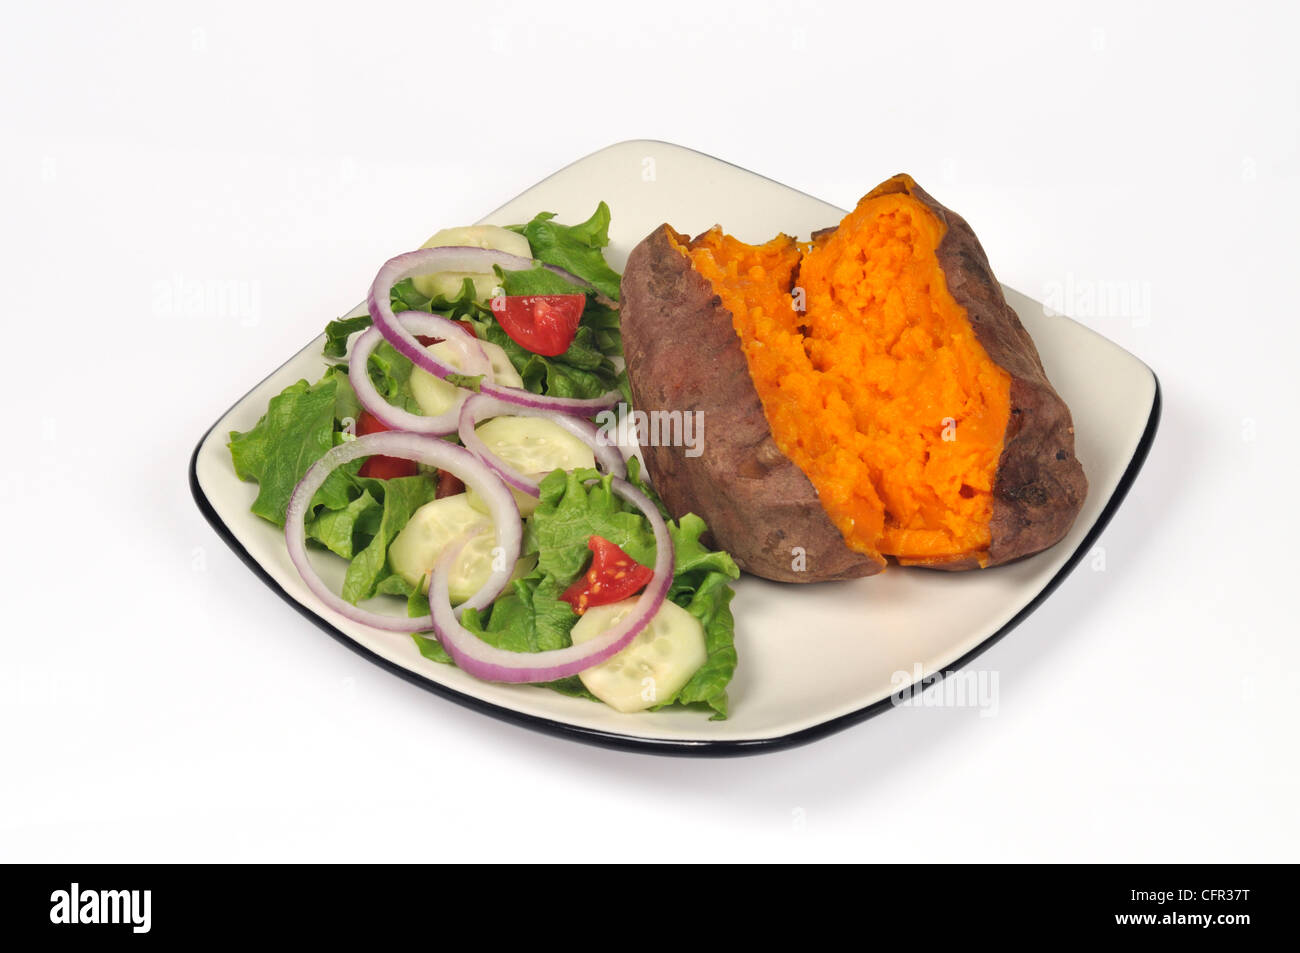 Cooked baked yam sweet potato cut in half with melted butter and garden salad on white plate on white background cut out Stock Photo